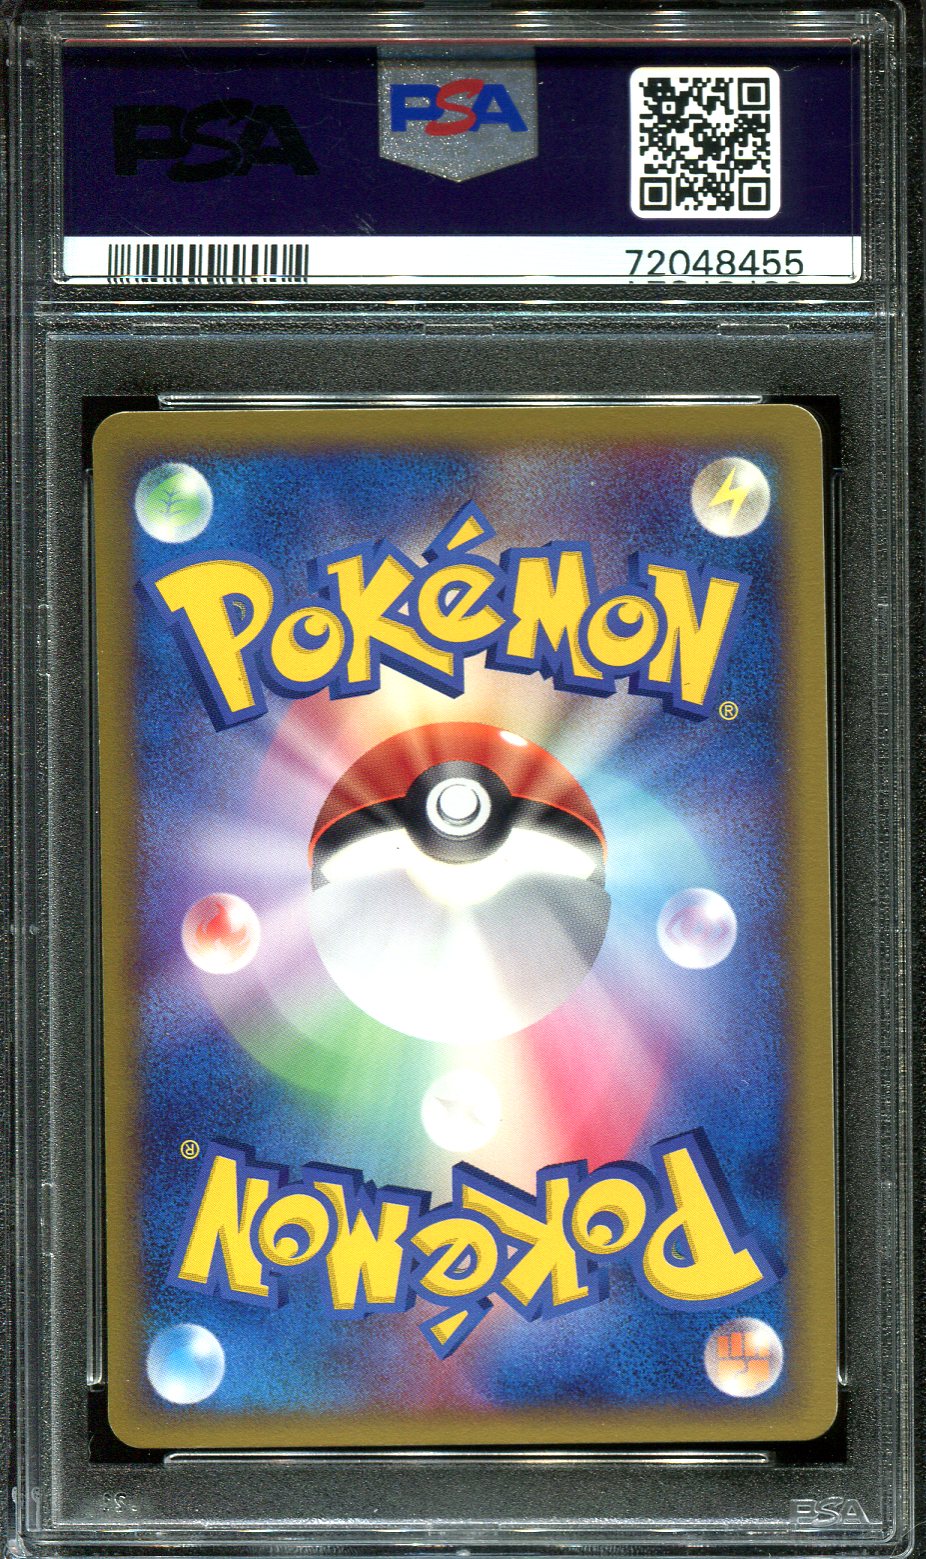 QUILAVA 002/016 PSA 10 POKEMON CONSTRUCTED DECK JAPANESE